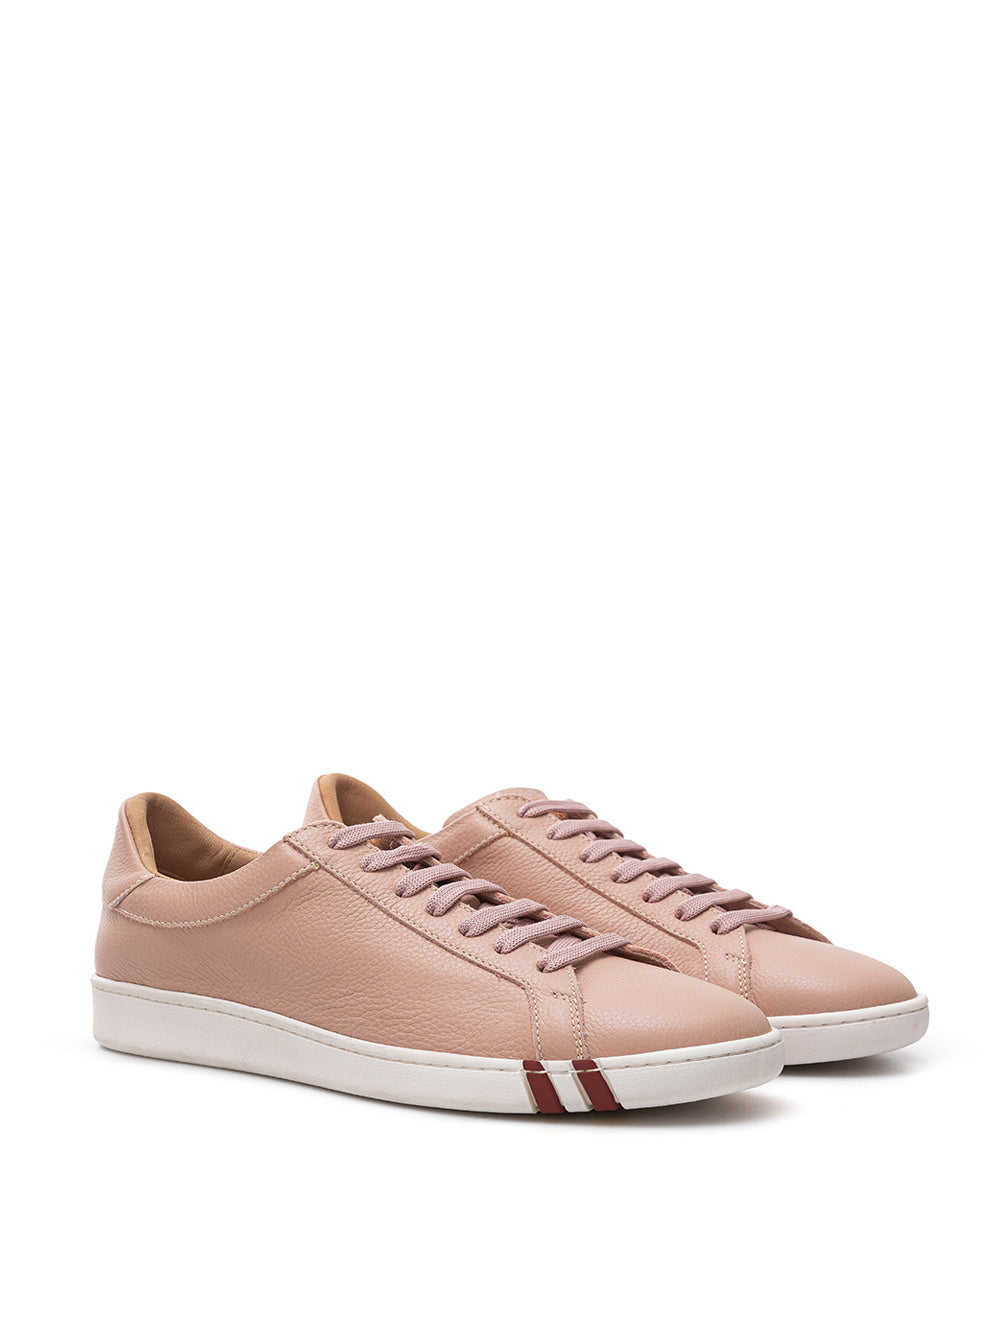 Bally Elegant Pink Leather Lace-Up Sneakers